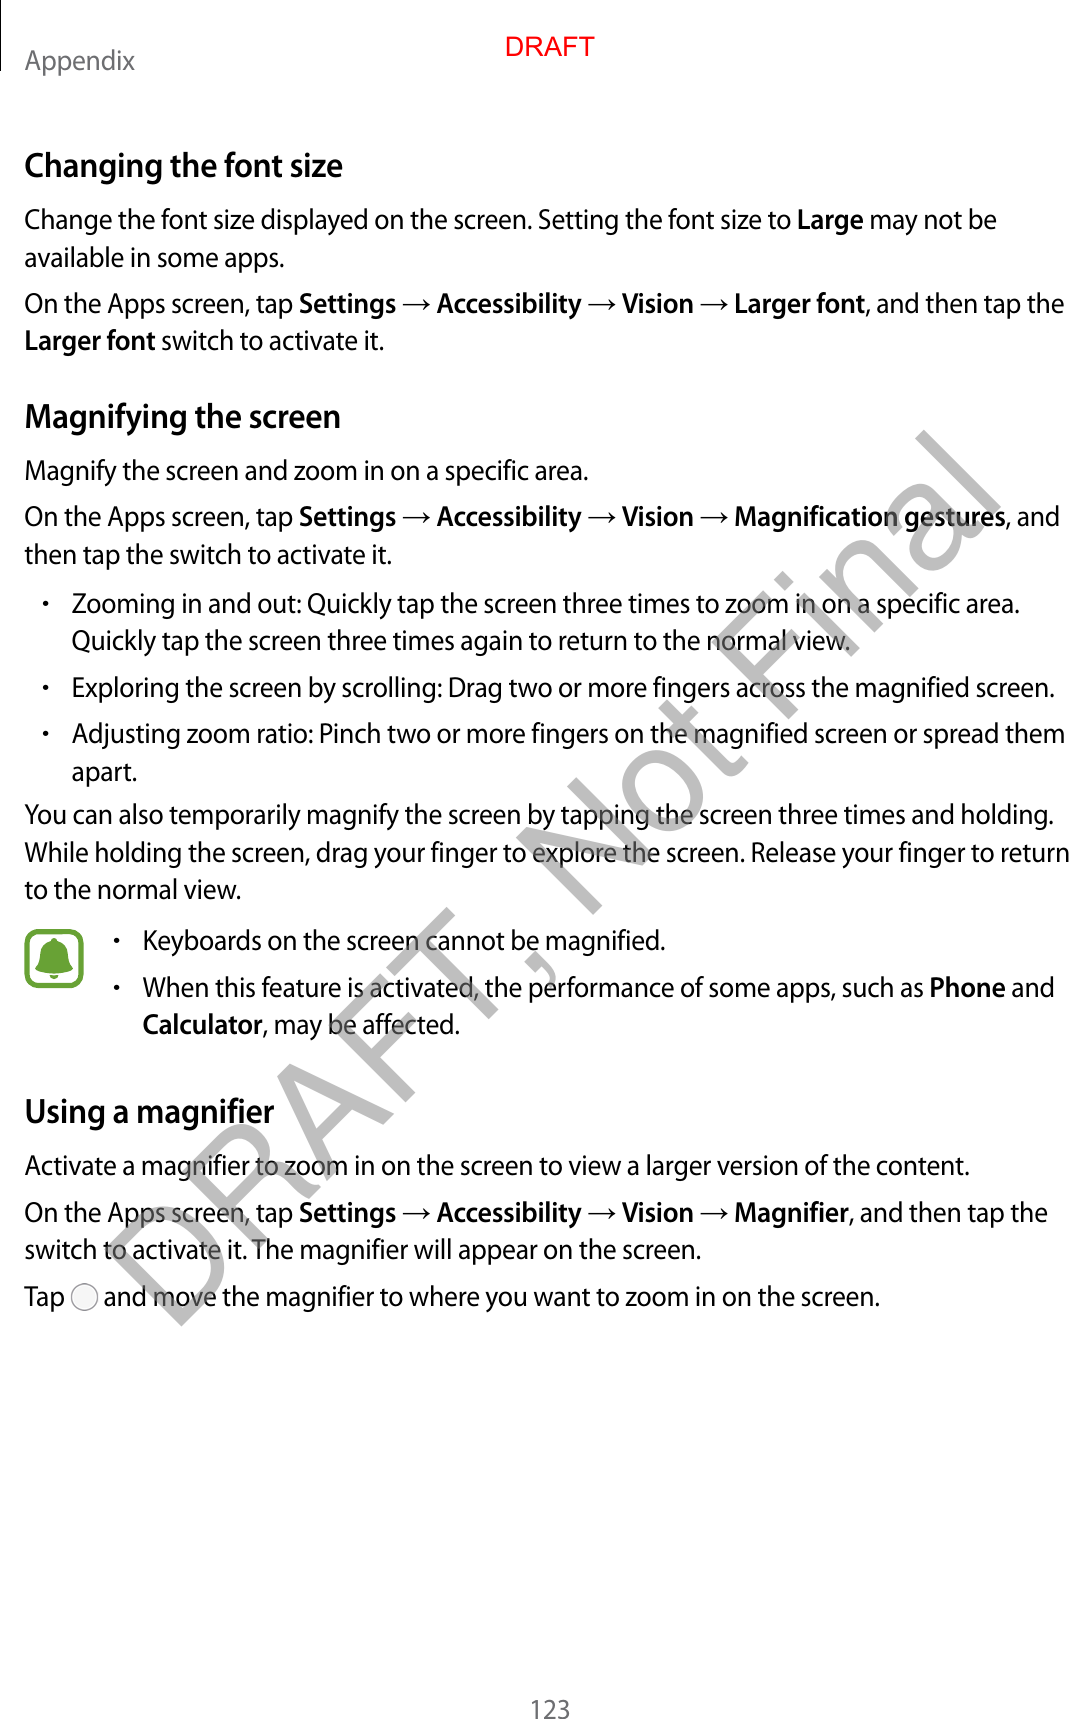 Appendix123Changing the font sizeChange the font size displayed on the screen. Setting the font size to Large may not be available in some apps.On the Apps screen, tap Settings  Accessibility  Vision  Larger font, and then tap the Larger font switch to activate it.Magnifying the screenMagnify the screen and zoom in on a specific area.On the Apps screen, tap Settings  Accessibility  Vision  Magnification gestures, and then tap the switch to activate it.•Zooming in and out: Quickly tap the screen three times to zoom in on a specific area.Quickly tap the screen three times again to return to the normal view.•Exploring the screen by scrolling: Drag two or more fingers across the magnified screen.•Adjusting zoom ratio: Pinch two or more fingers on the magnified screen or spread themapart.You can also temporarily magnify the screen by tapping the screen three times and holding. While holding the screen, drag your finger to explore the screen. Release your finger to return to the normal view.•Keyboards on the screen cannot be magnified.•When this feature is activated, the performance of some apps, such as Phone andCalculator, may be affected.Using a magnifierActivate a magnifier to zoom in on the screen to view a larger version of the content.On the Apps screen, tap Settings  Accessibility  Vision  Magnifier, and then tap the switch to activate it. The magnifier will appear on the screen.Tap   and move the magnifier to where you want to zoom in on the screen.DRAFTDRAFT, Not Final